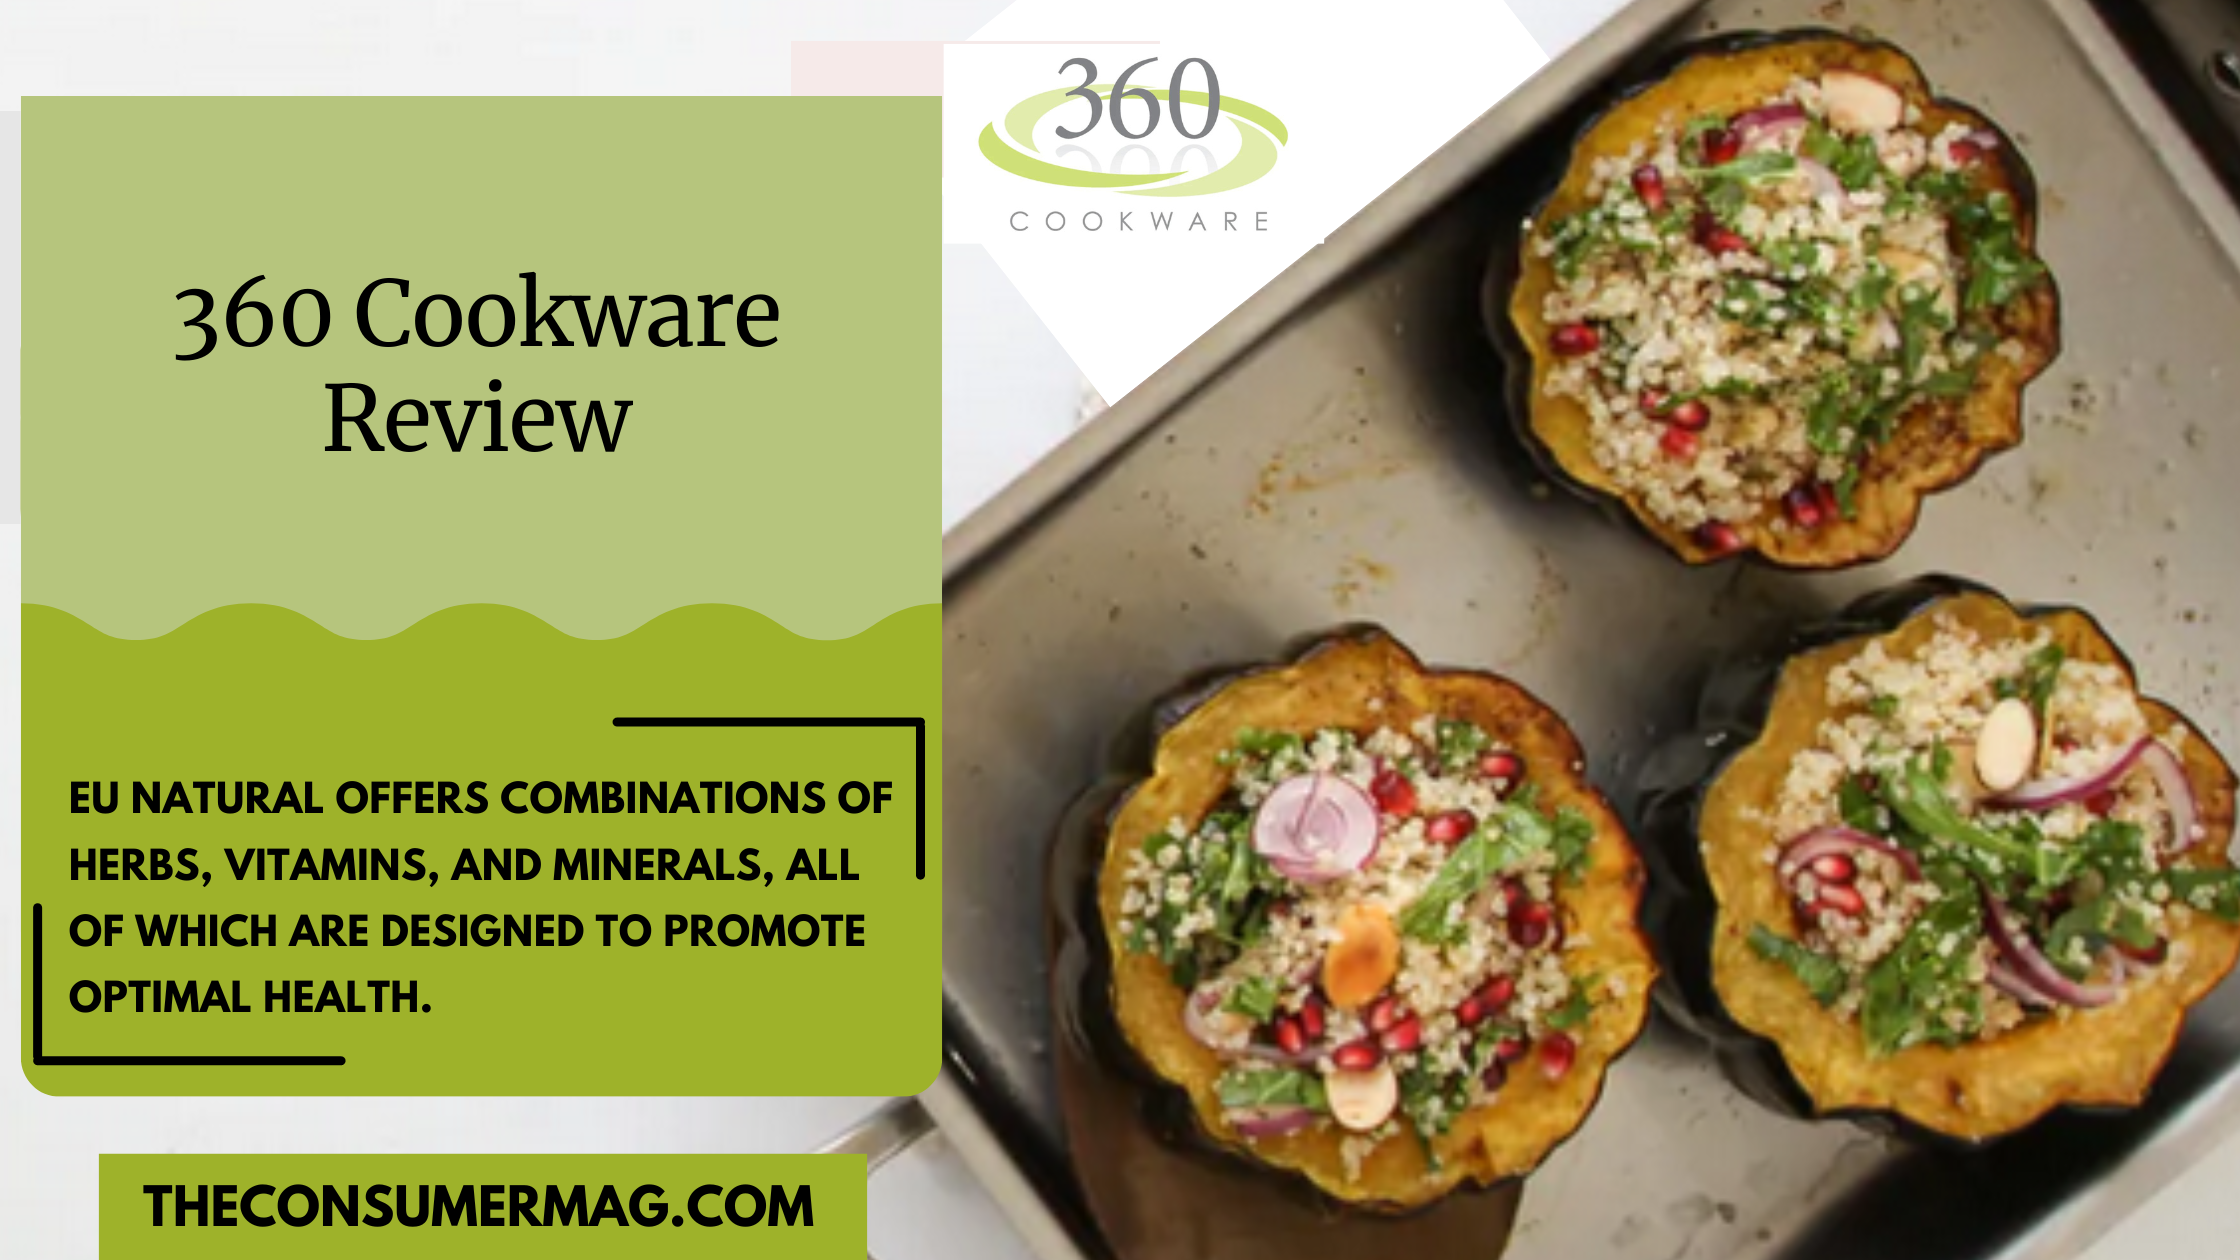 360 Cookware Review |Read All 360 Cookware Reviews|